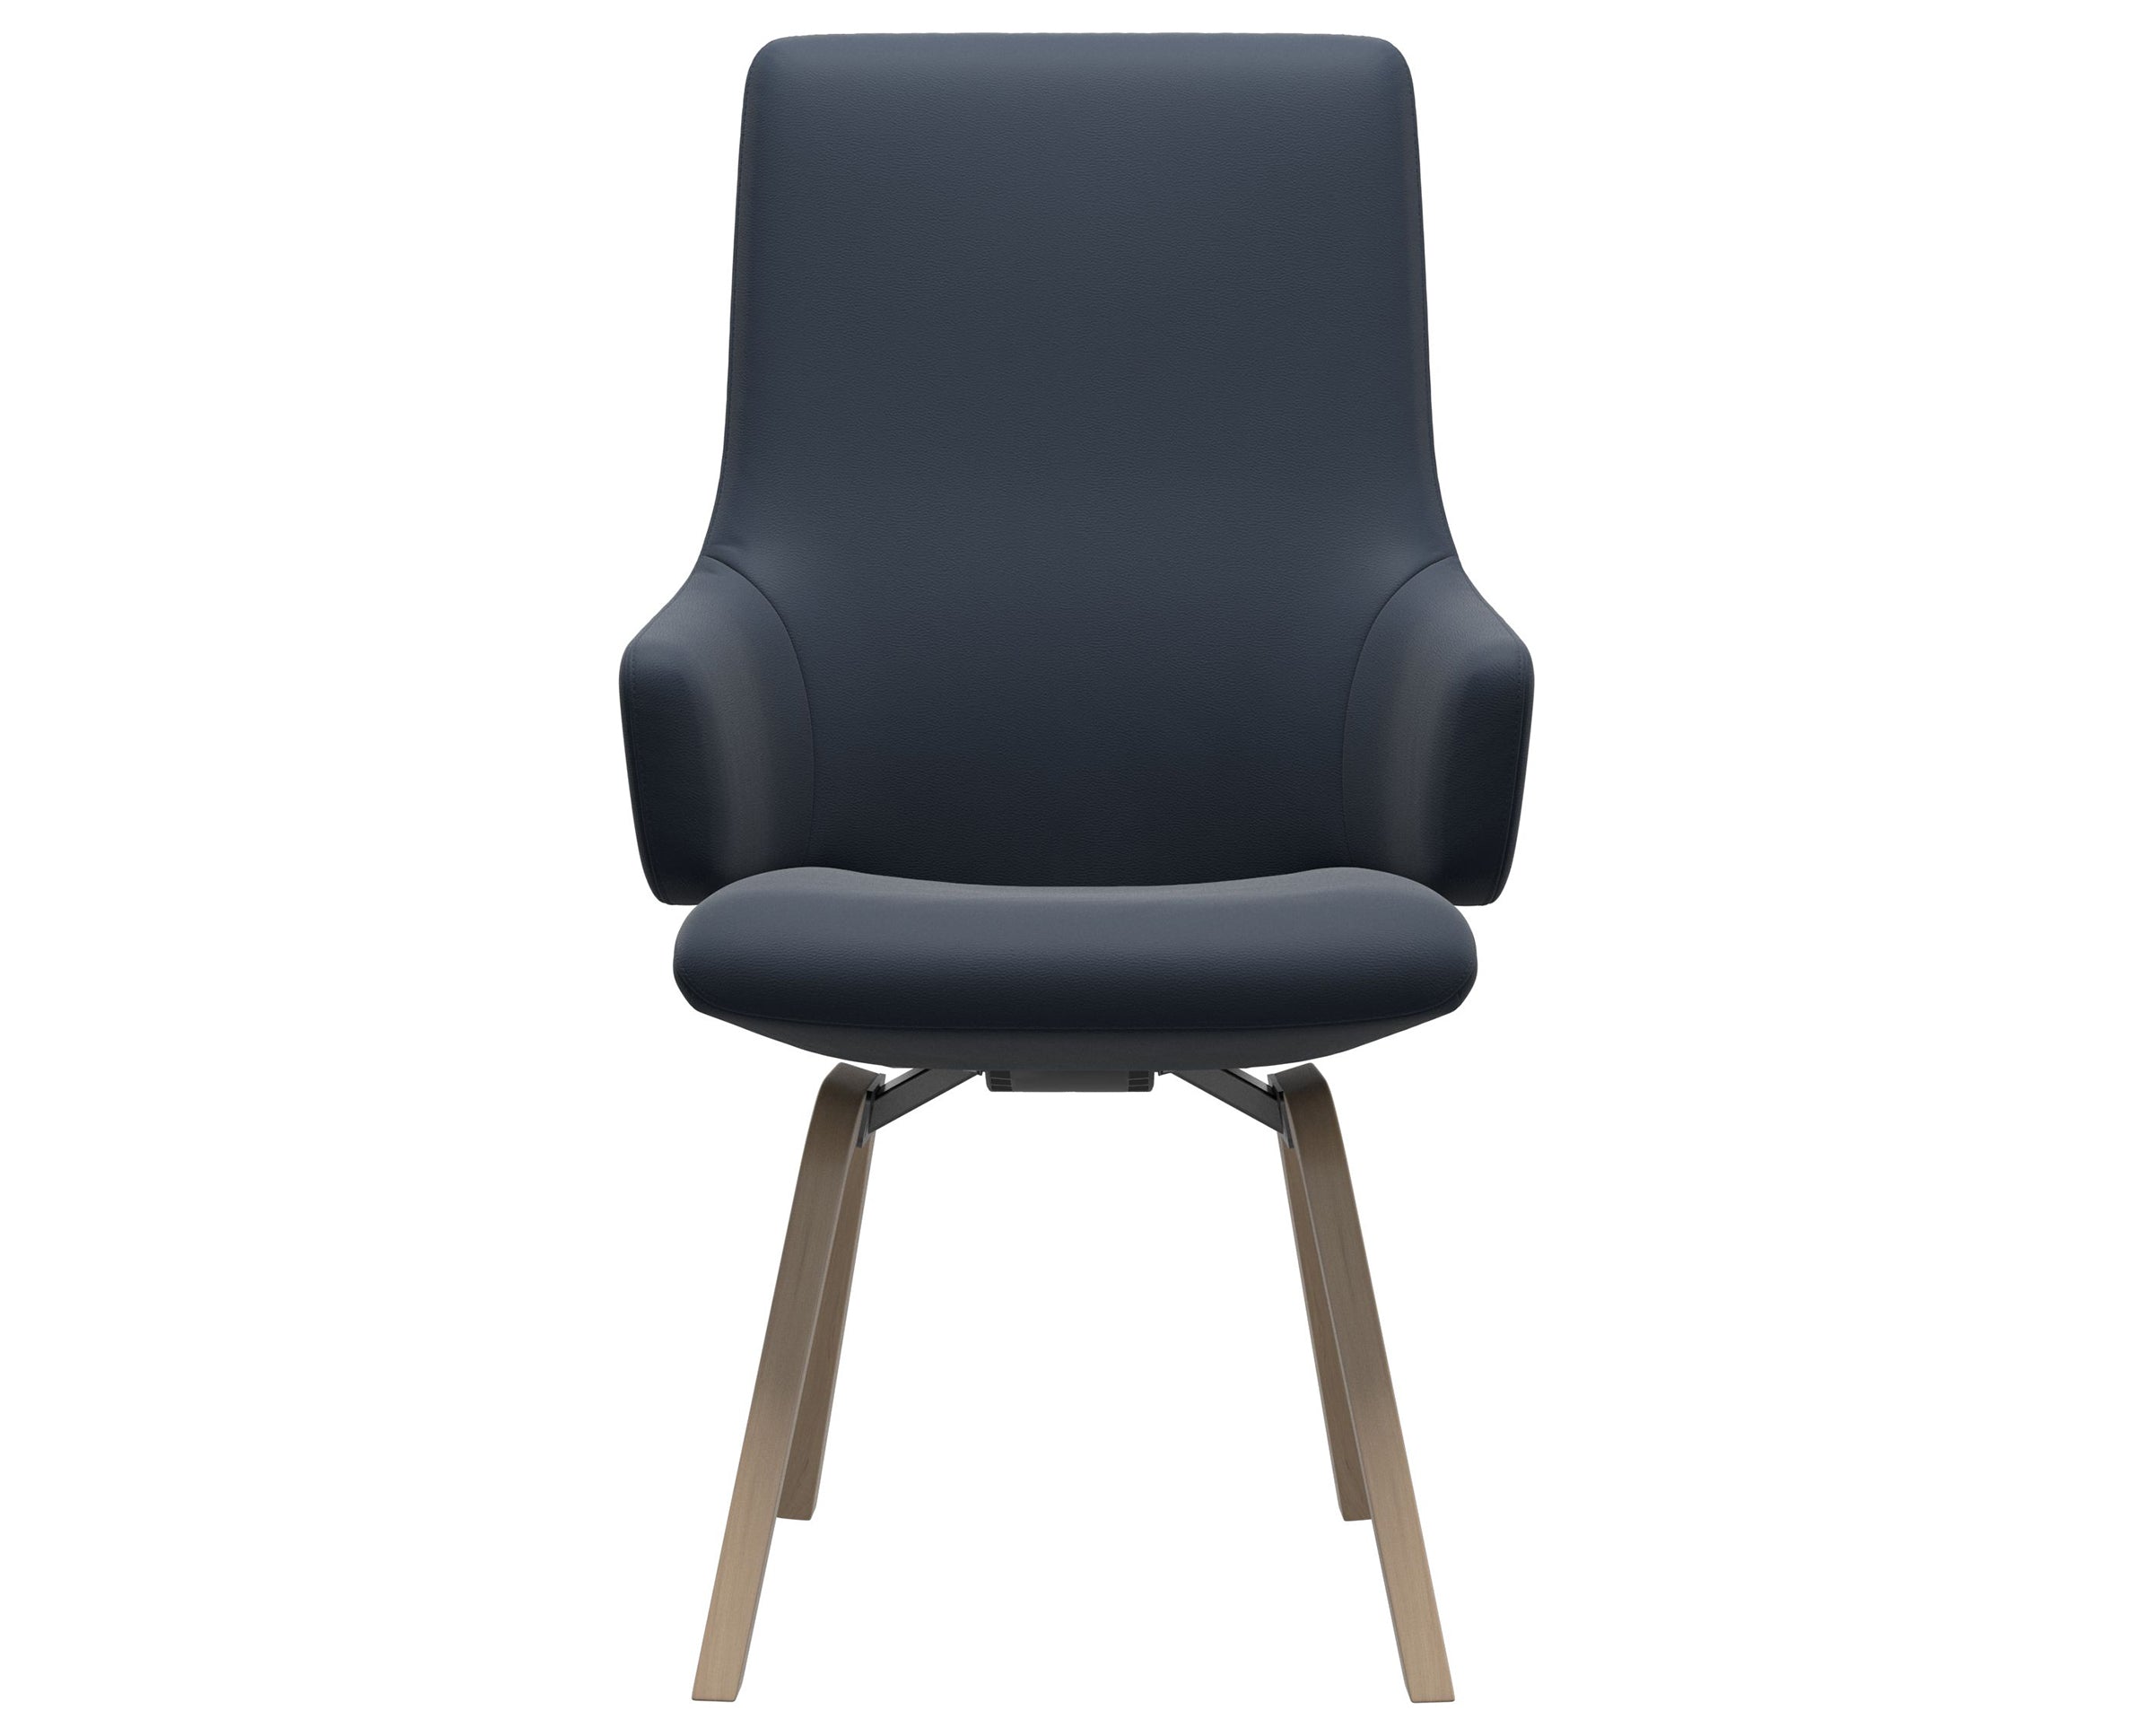 Paloma Leather Oxford Blue and Natural Base | Stressless Laurel High Back D200 Dining Chair w/Arms | Valley Ridge Furniture